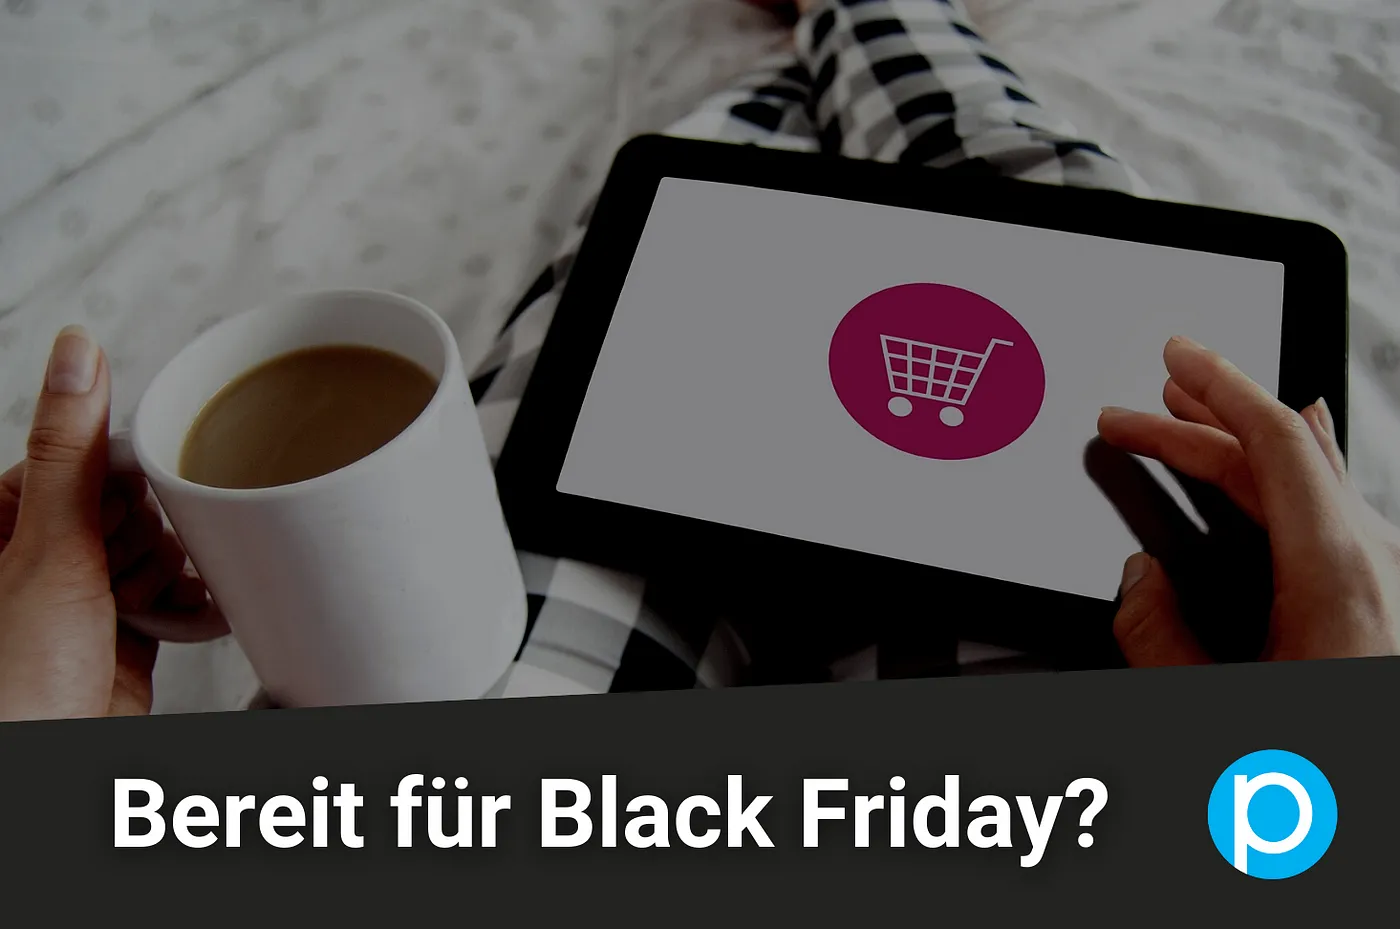 Black figures for online retail: the most important holidays in November